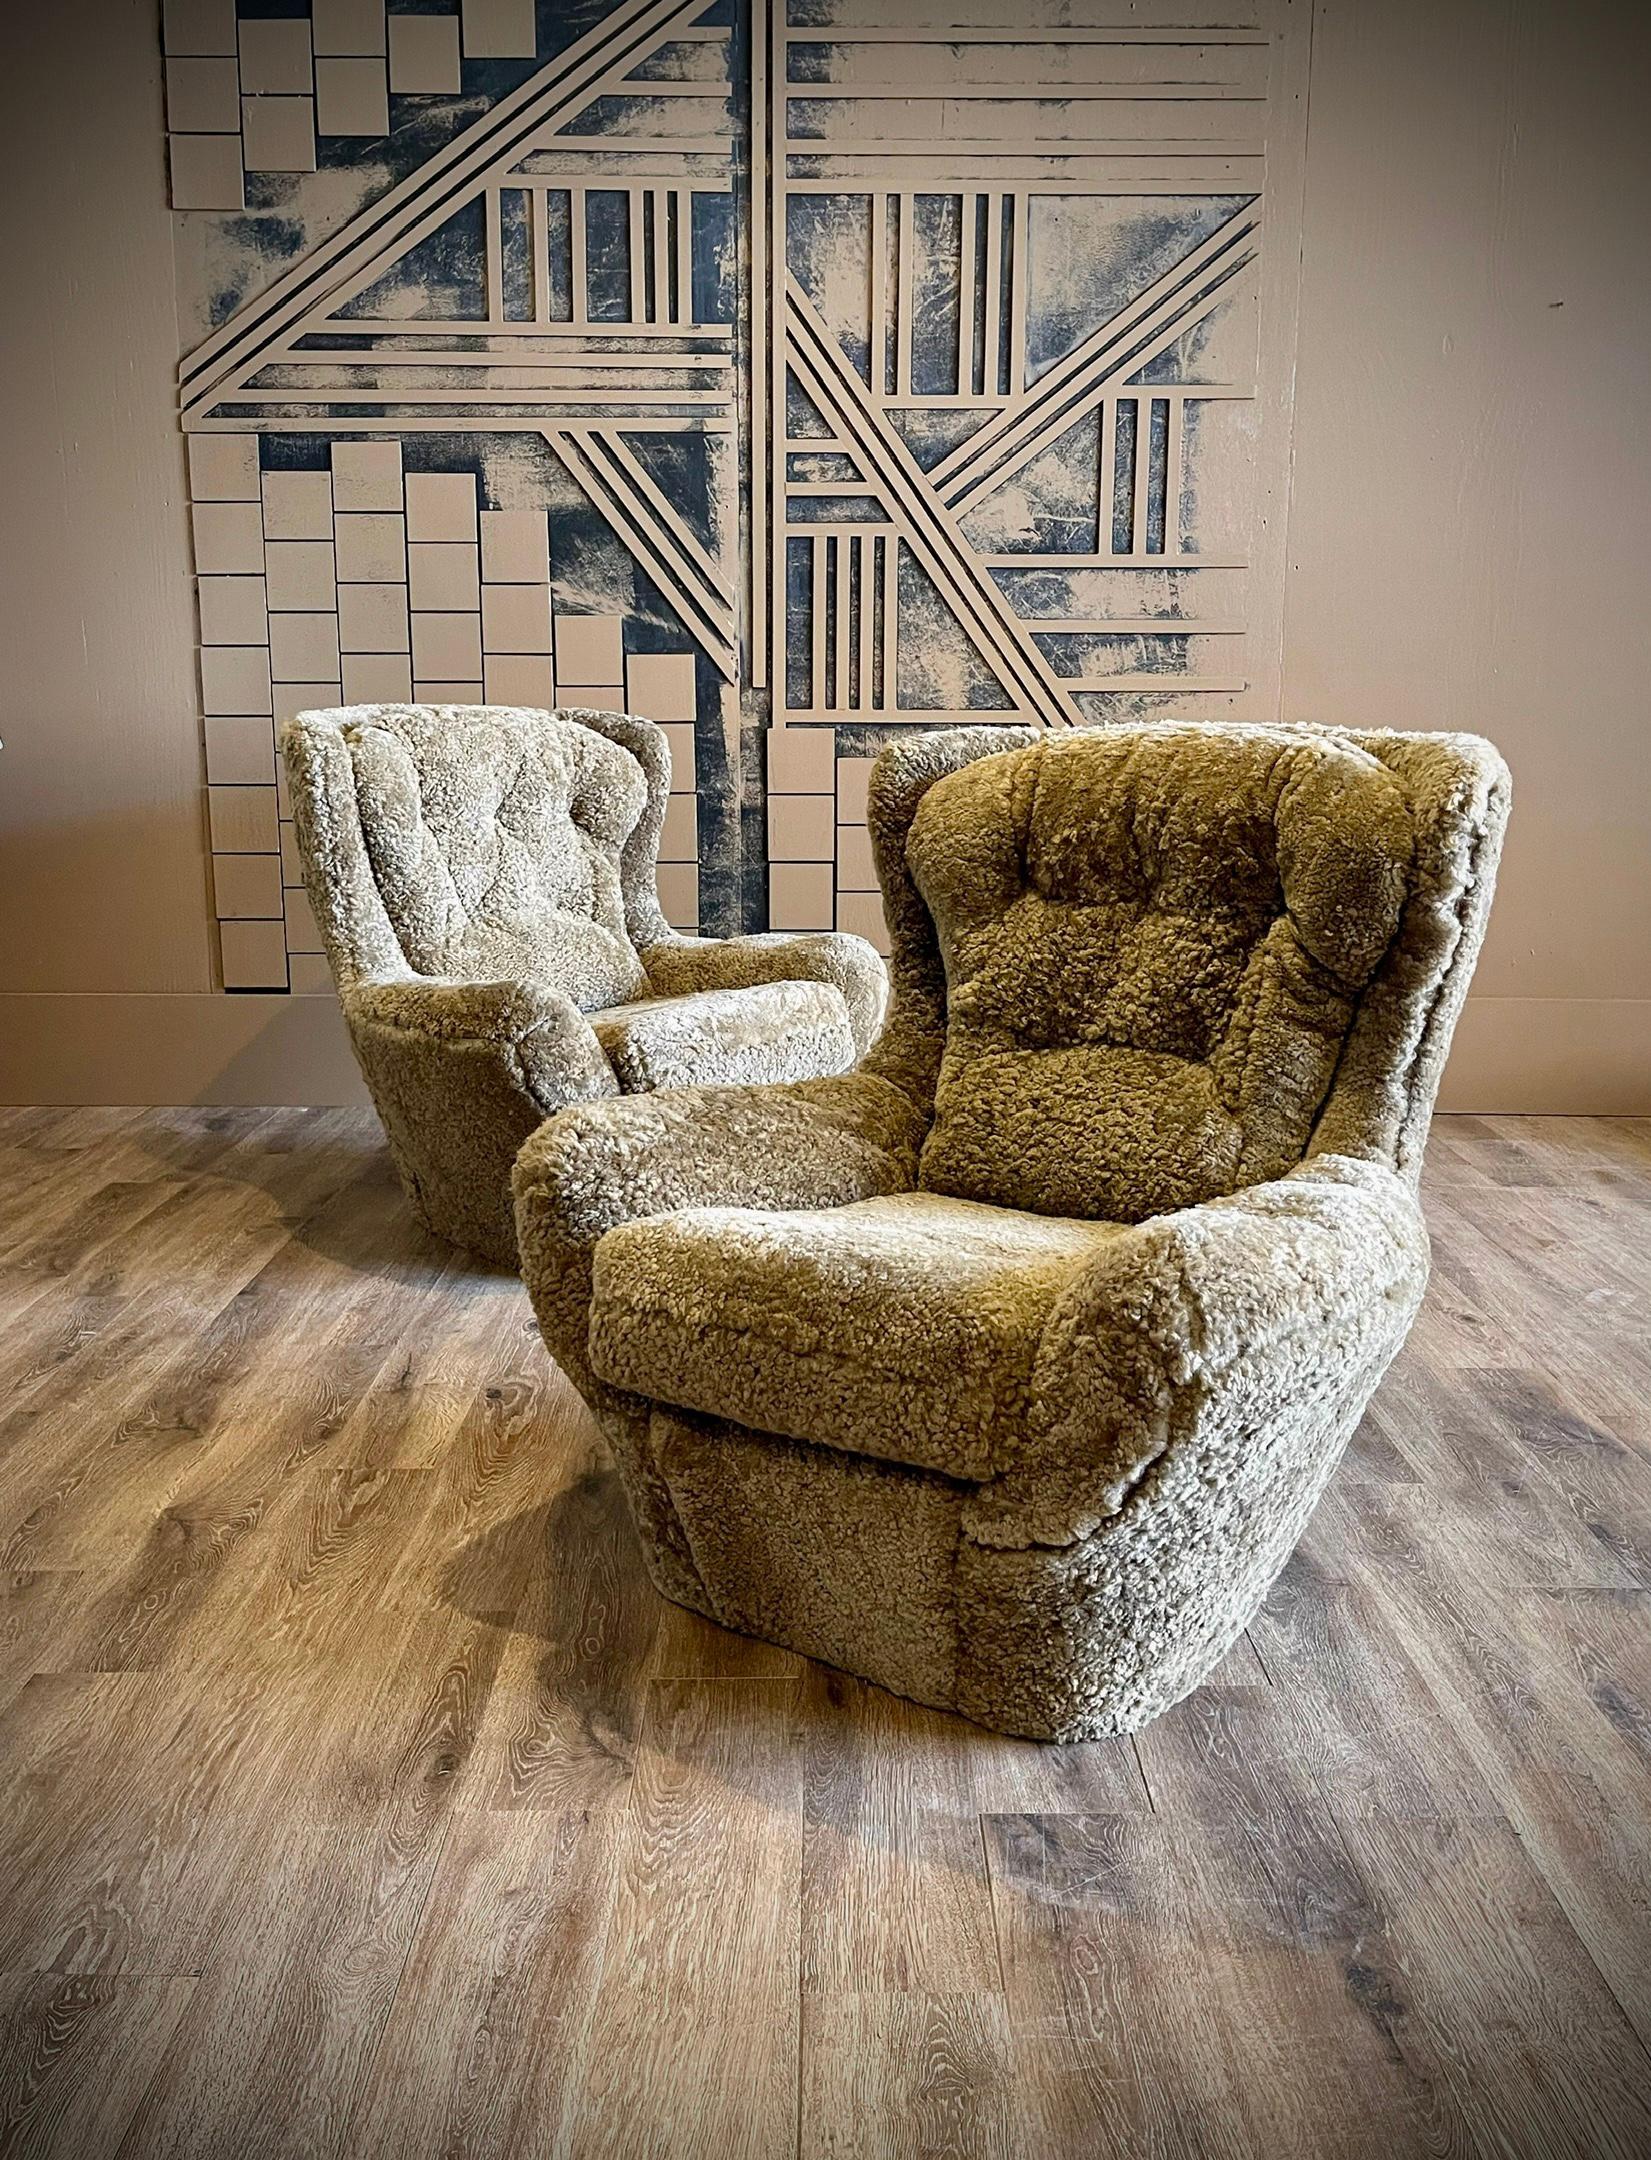 Indulge in unparalleled relaxation with this stunning pair of truffle-colored sheepskin French MCM Steiner Knoll Lounge Chairs. Embracing the essence of mid-century modern design, they seamlessly blend luxurious comfort with sleek style. Sink into